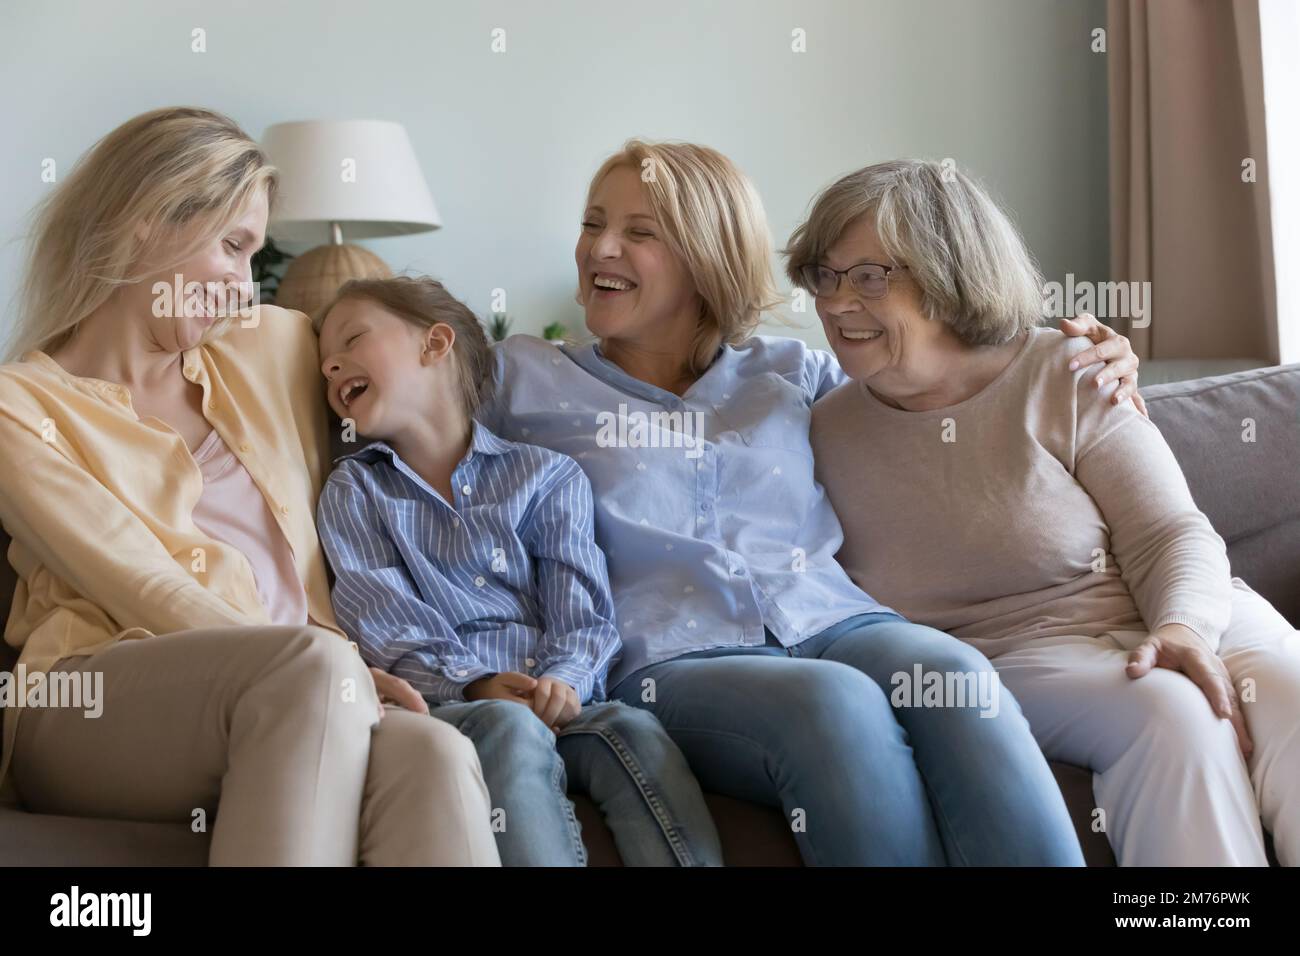 Joyful happy girls and women of different ages laughing Stock Photo